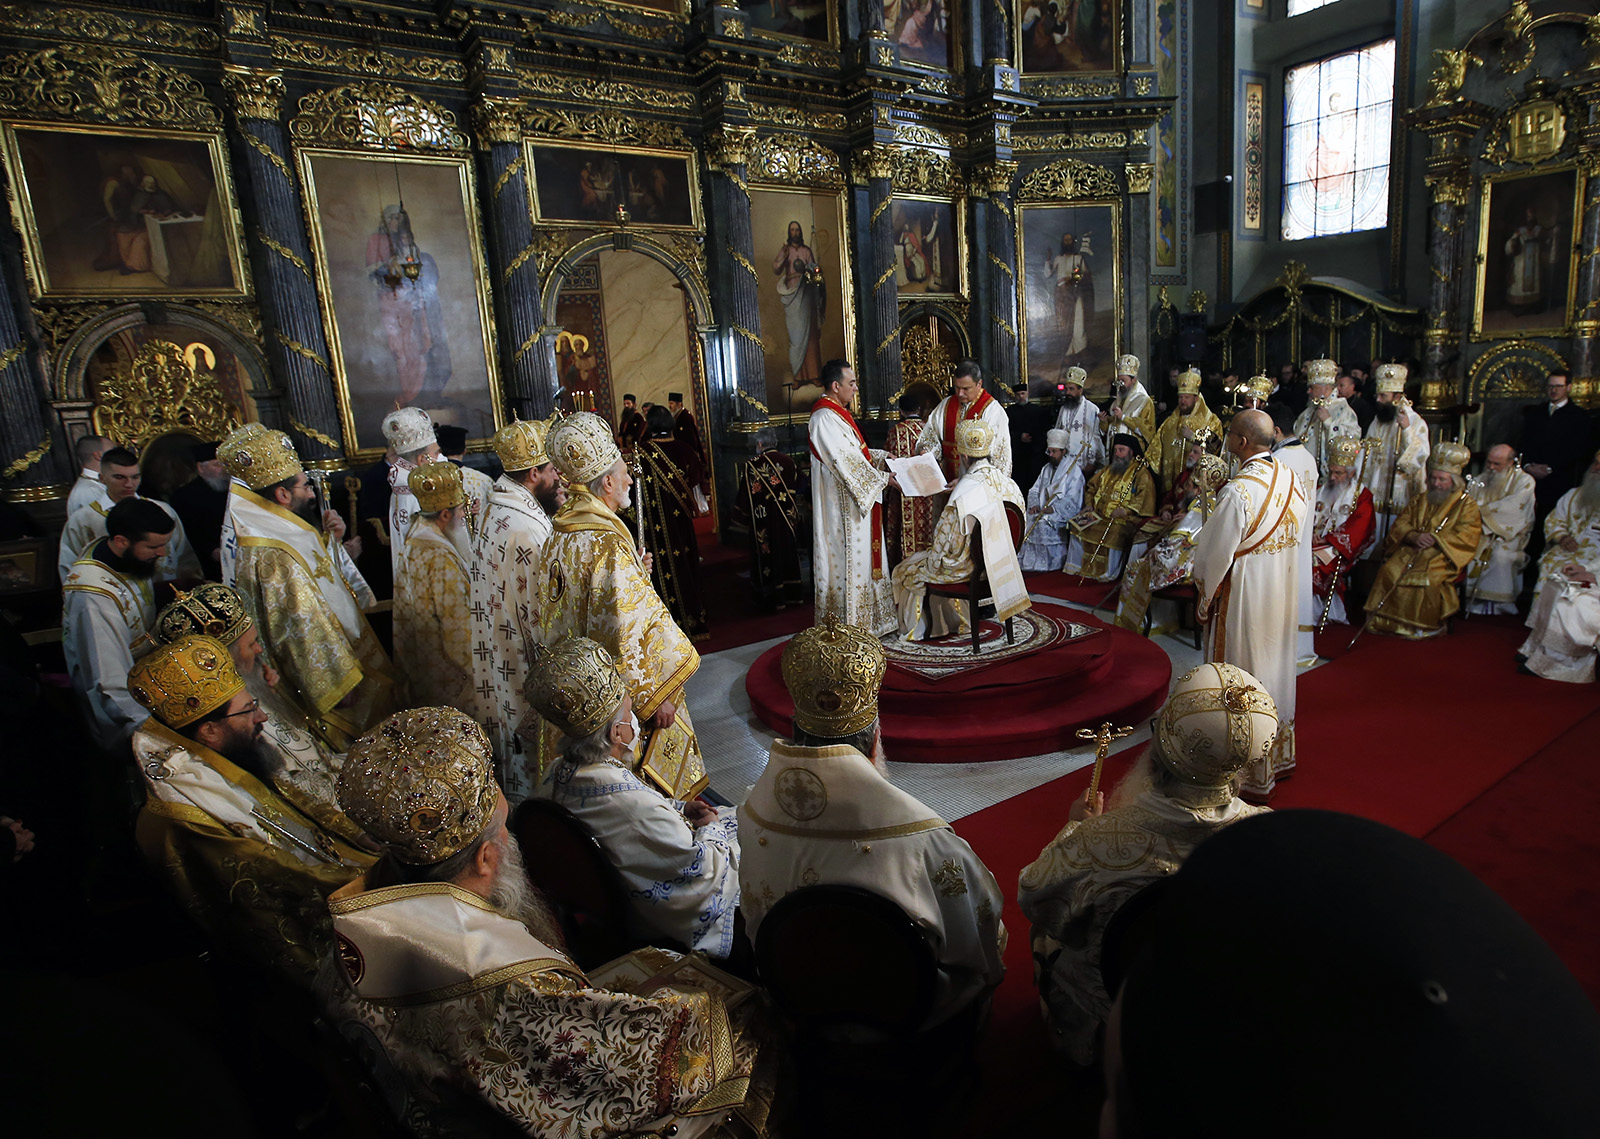 The new head of the Serbian Orthodox Church, Patriarch Porfirije, seated center, performs the liturgy ceremony in Belgrade's Congregational Church, Serbia, Friday, Feb. 19, 2021. Patriarch Porfirije replaces Patriarch Irinej, who died in November 2020 from COVID-19 complications. (AP Photo/Darko Vojinovic)